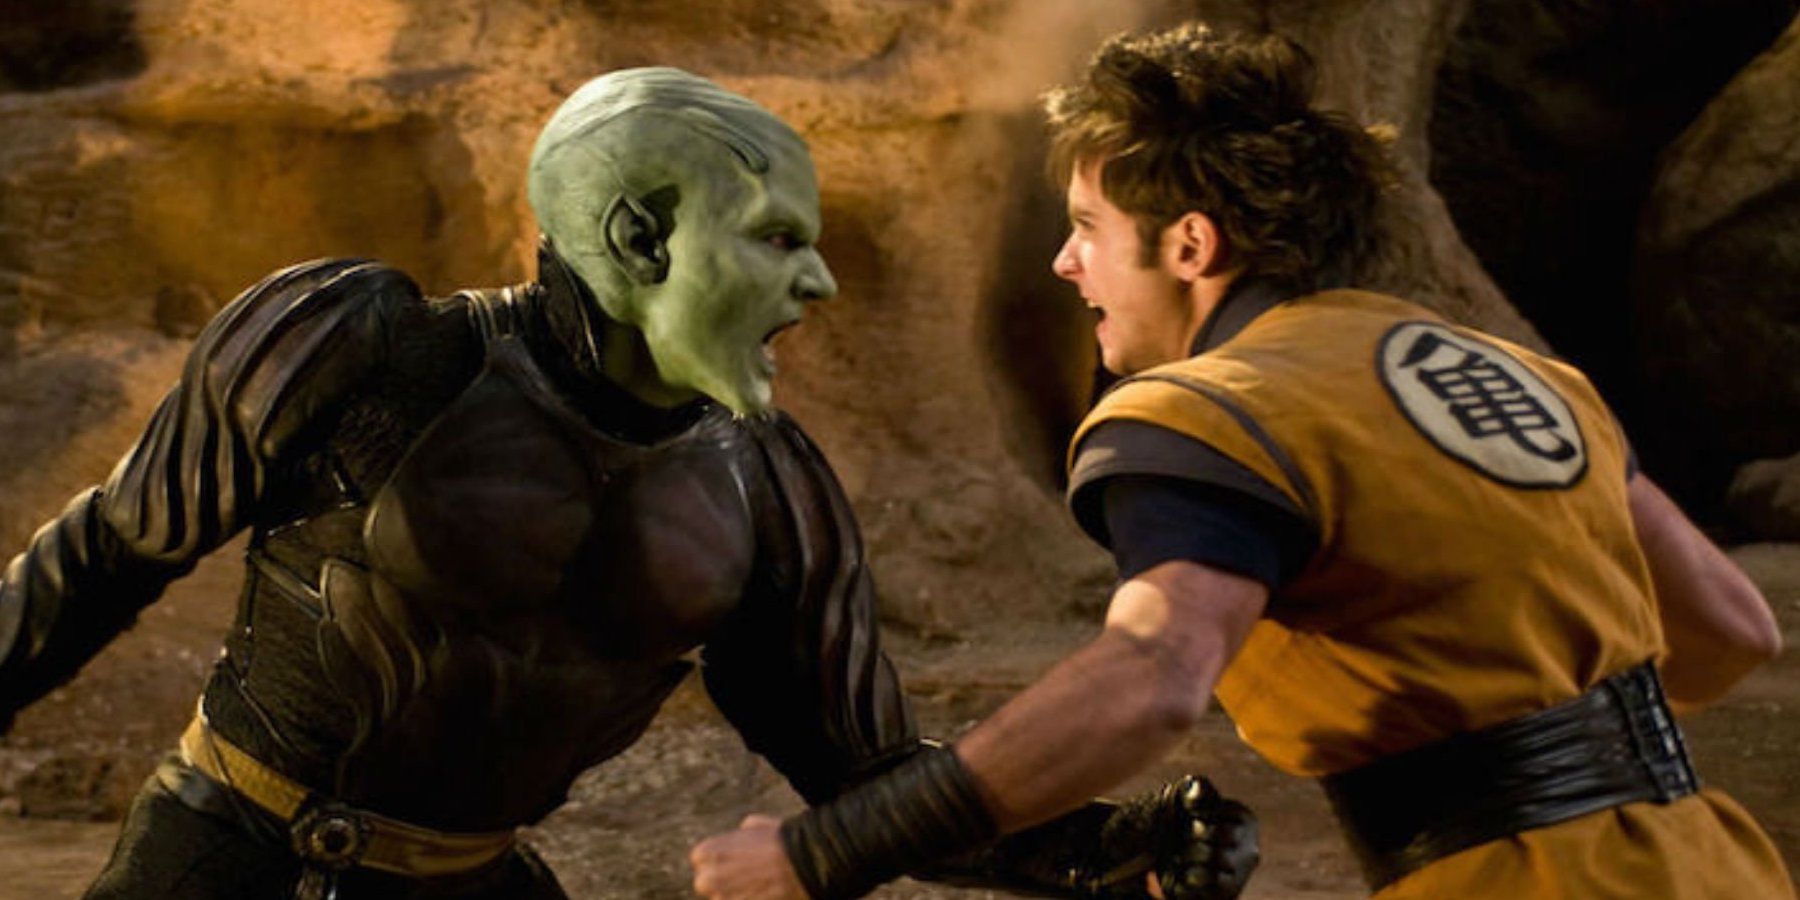 Dragonball Evolution Introduced James Marsters to the Franchise